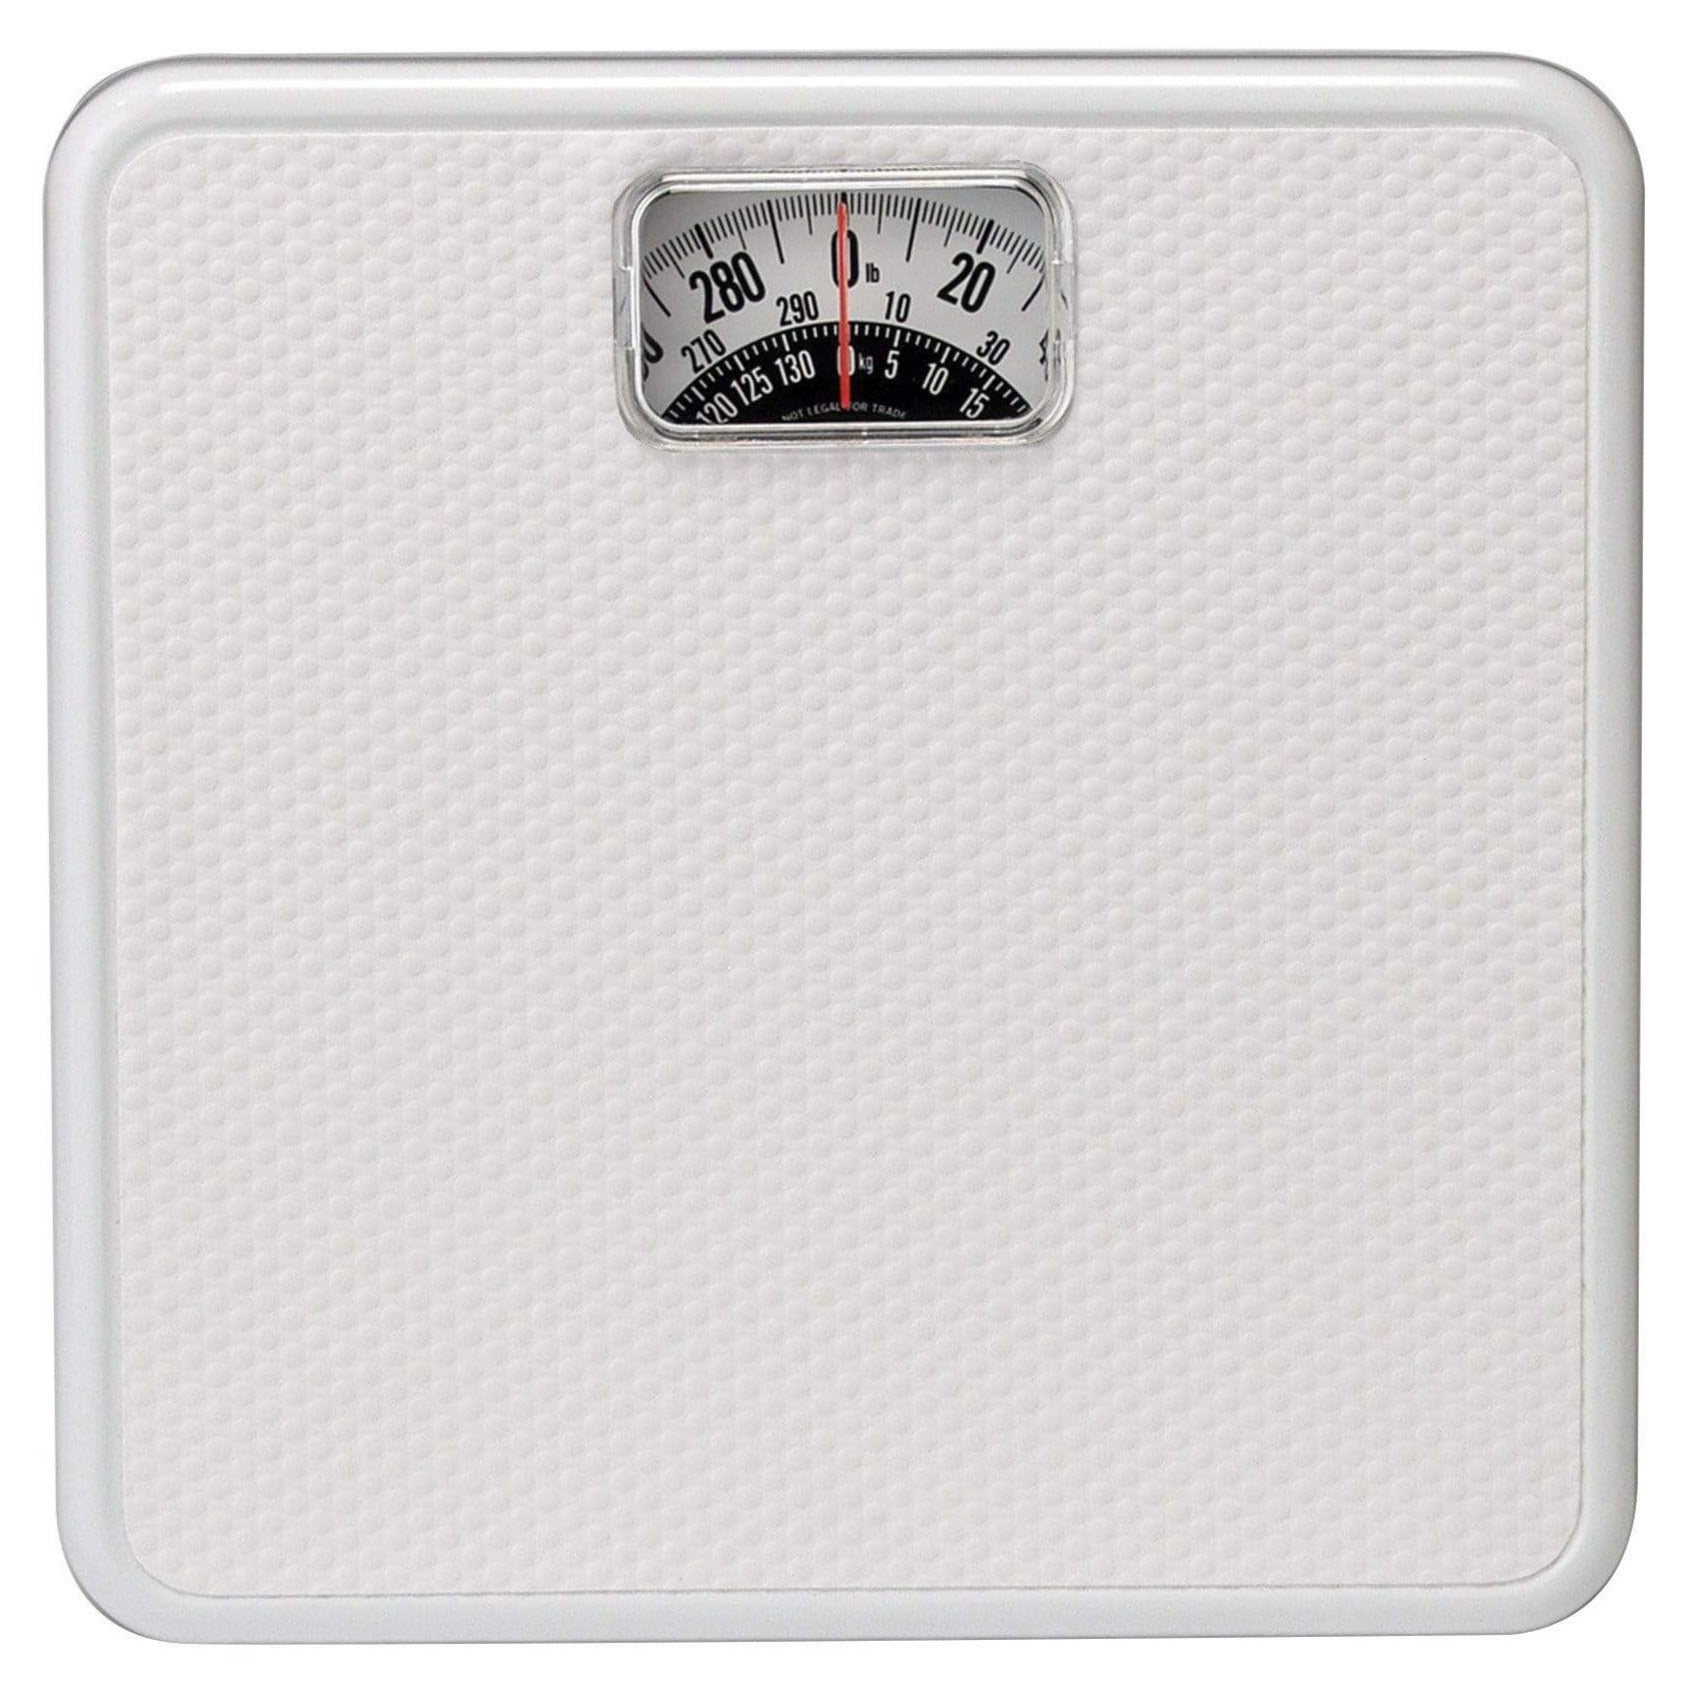  Taylor Battery Free Analog Scales for Body Weight